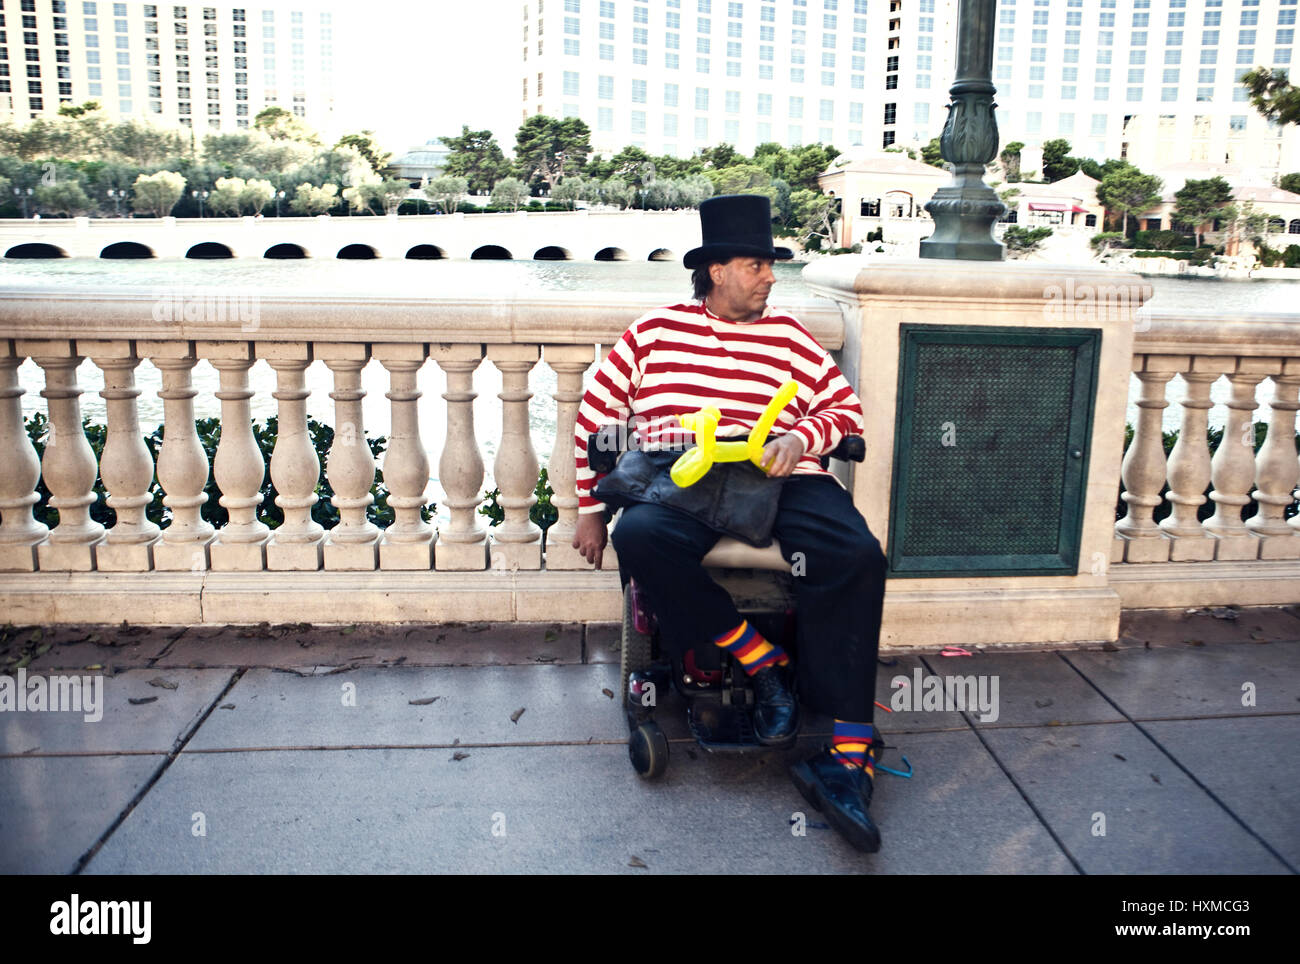 A comic performer in a wheelchair entertaining people on a street in Las Vegas, United States of America. Stock Photo